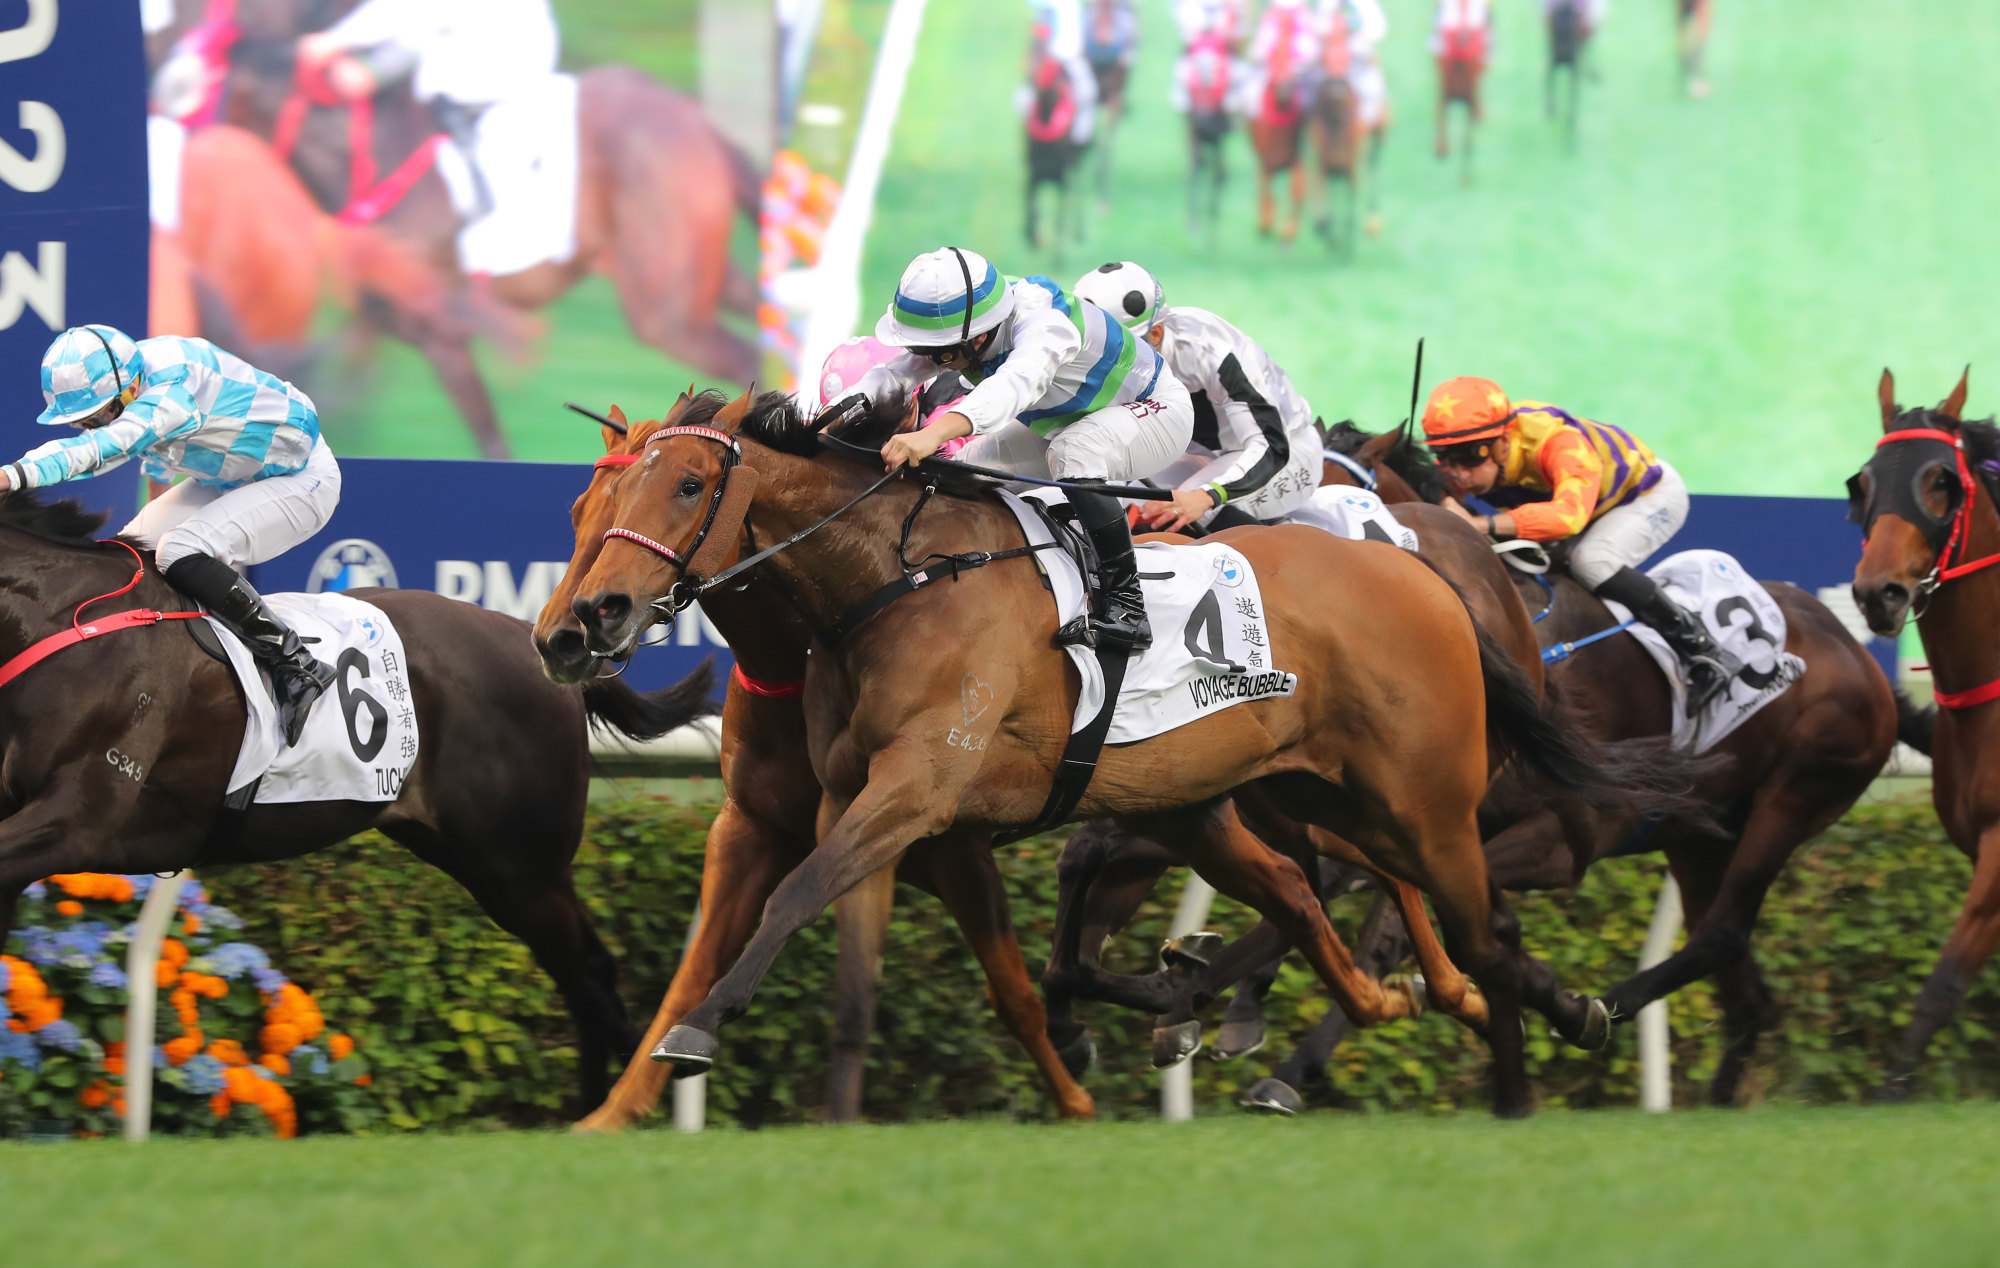 Voyage Bubble wins the Hong Kong Derby.